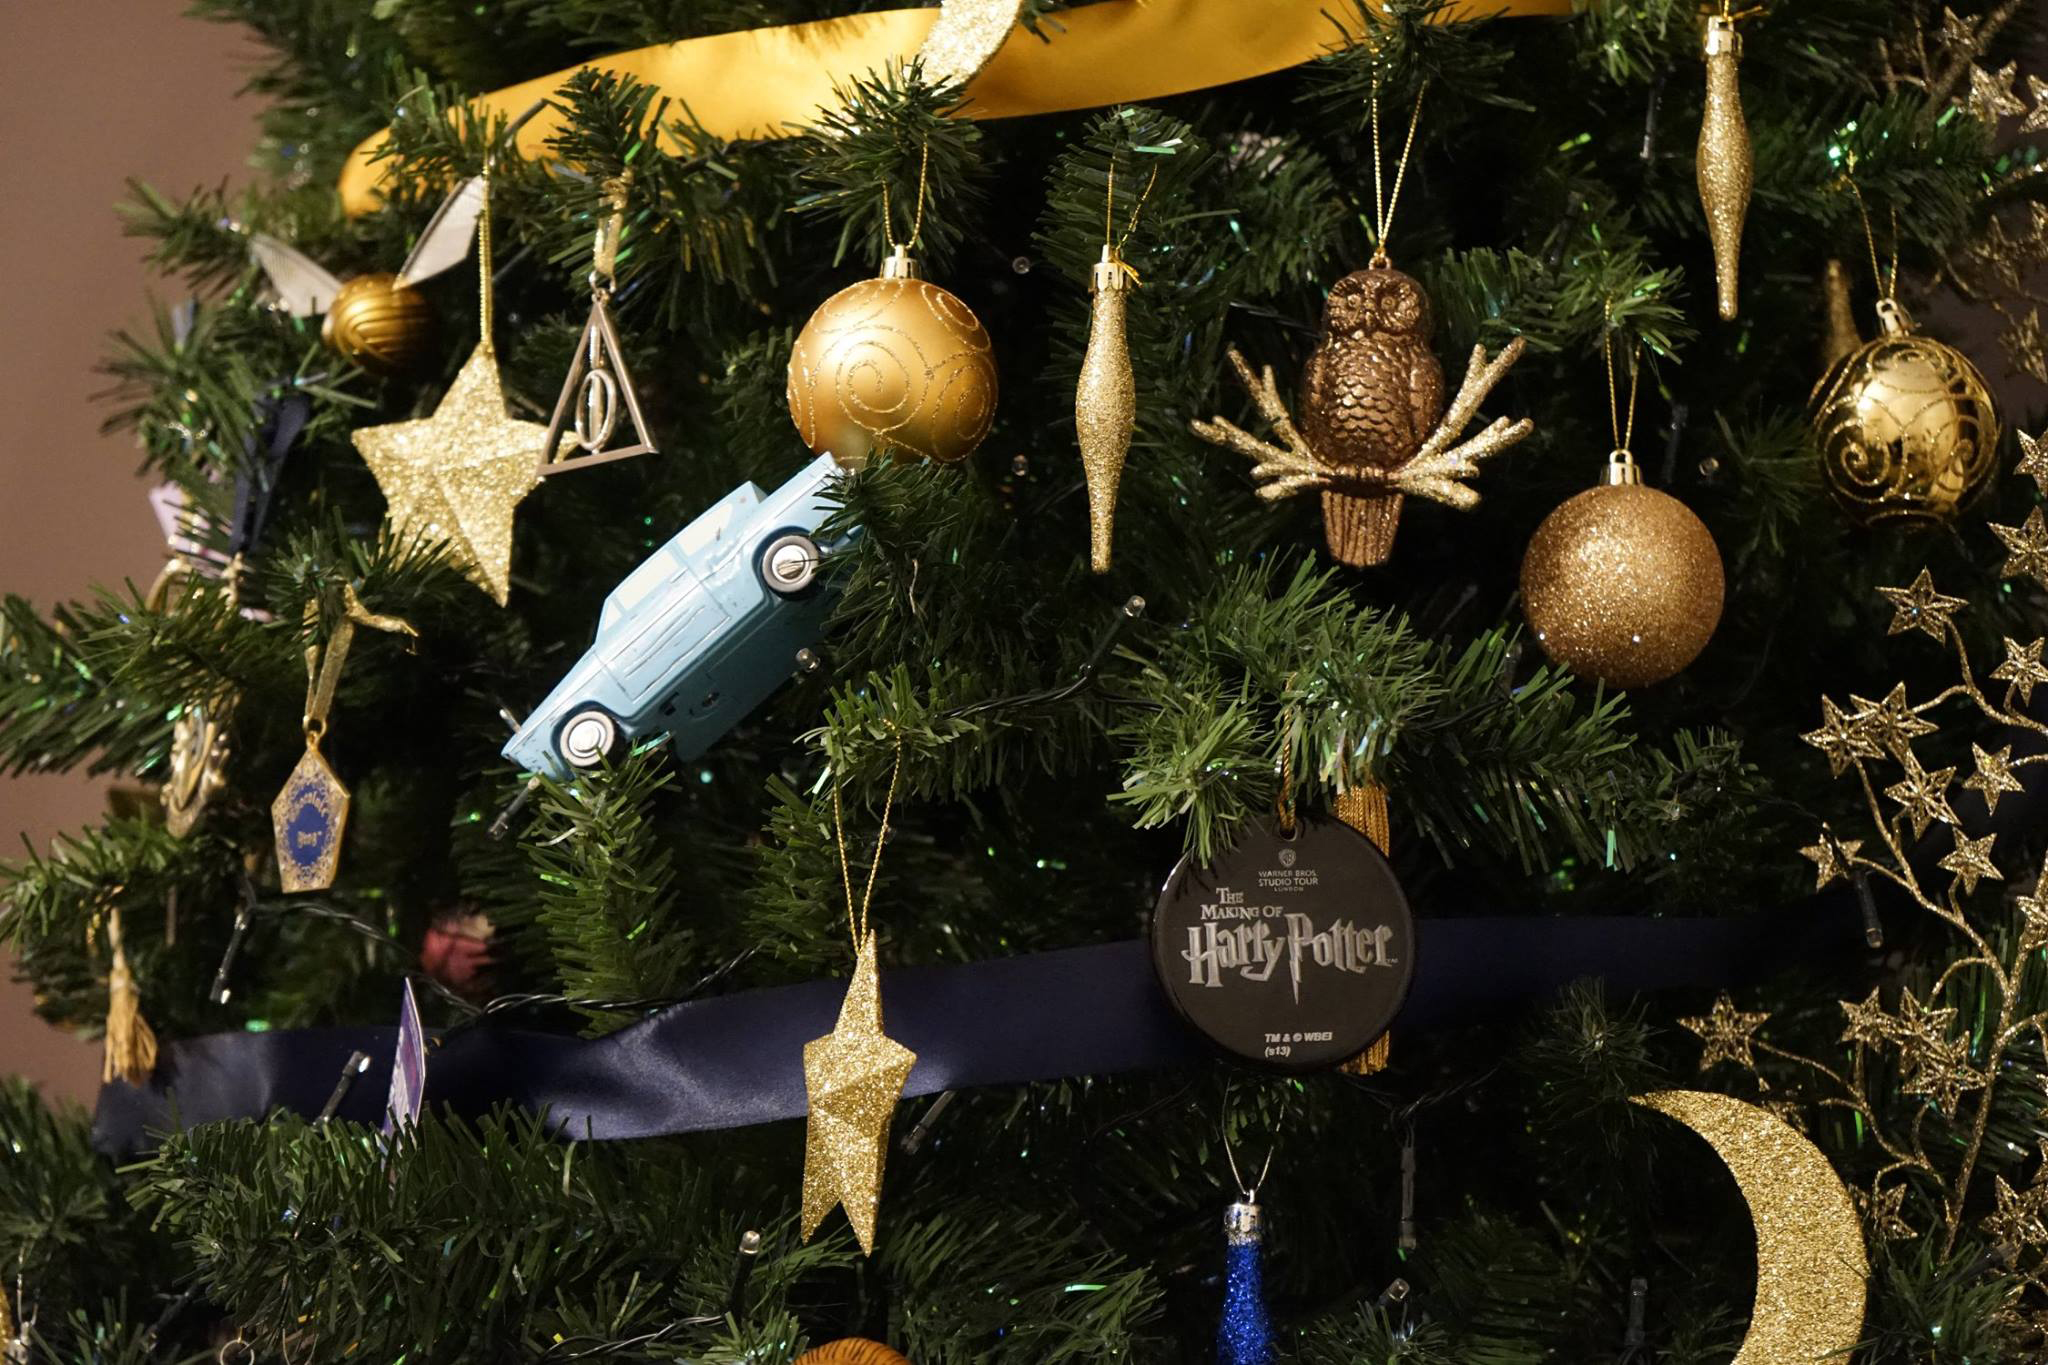 Harry Potter themed Christmas tree decorations